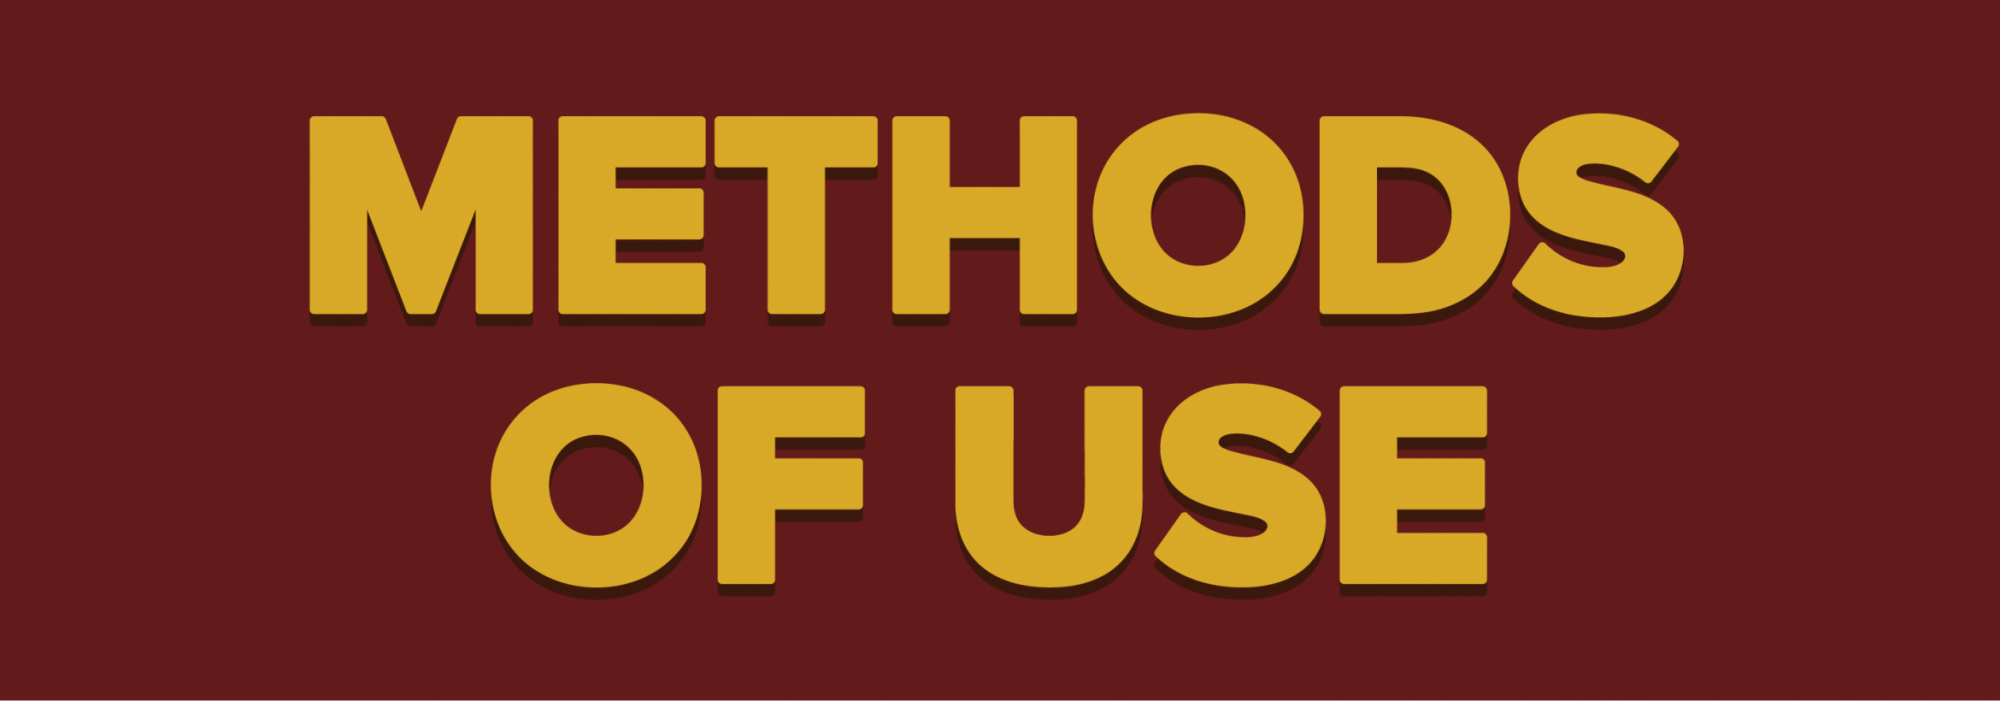 Methods of use